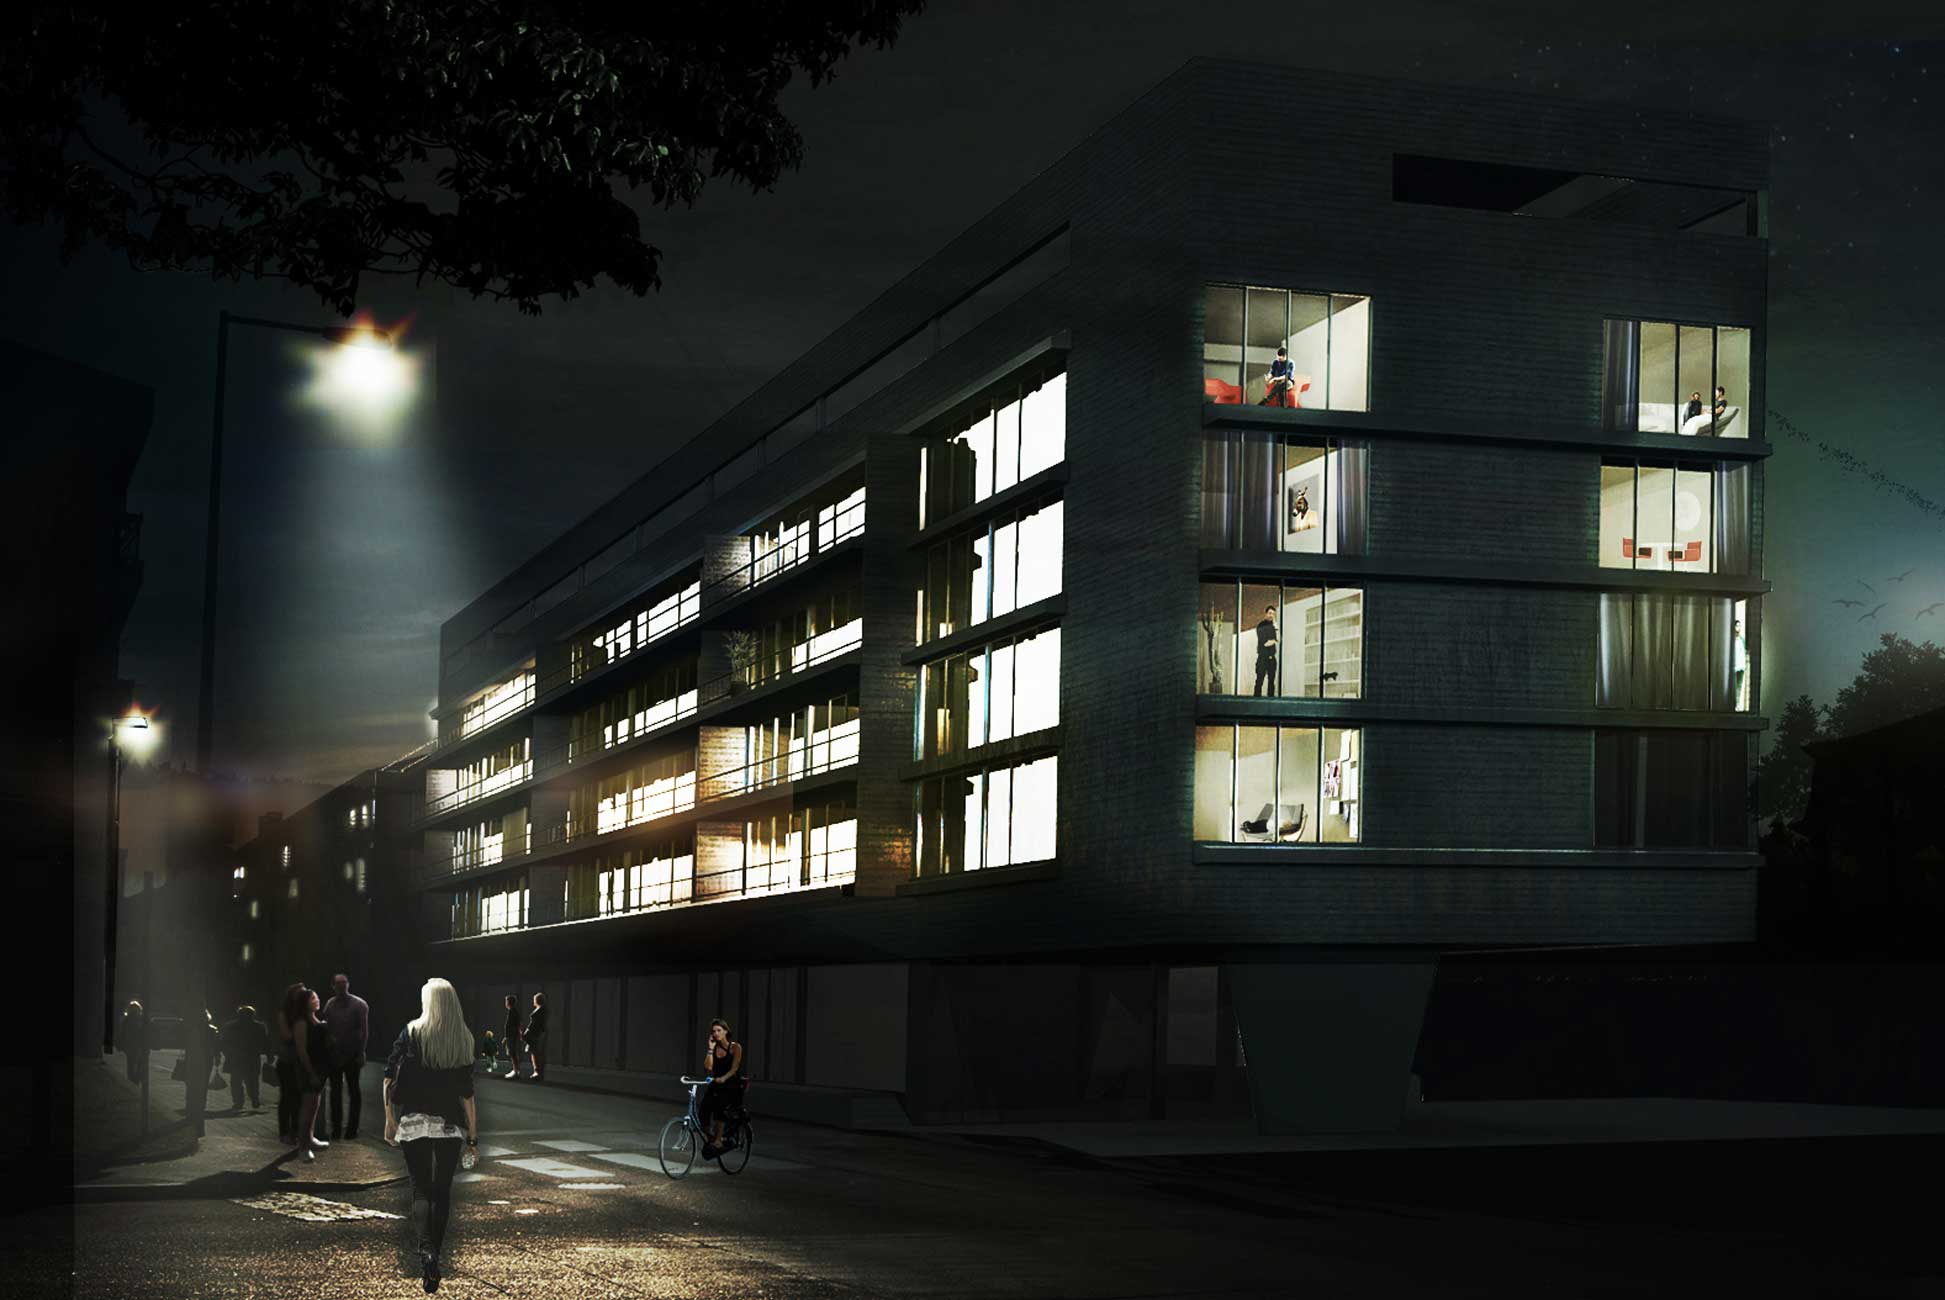 A computer generated image illustrating the Collective Housing as seen from the outside at night